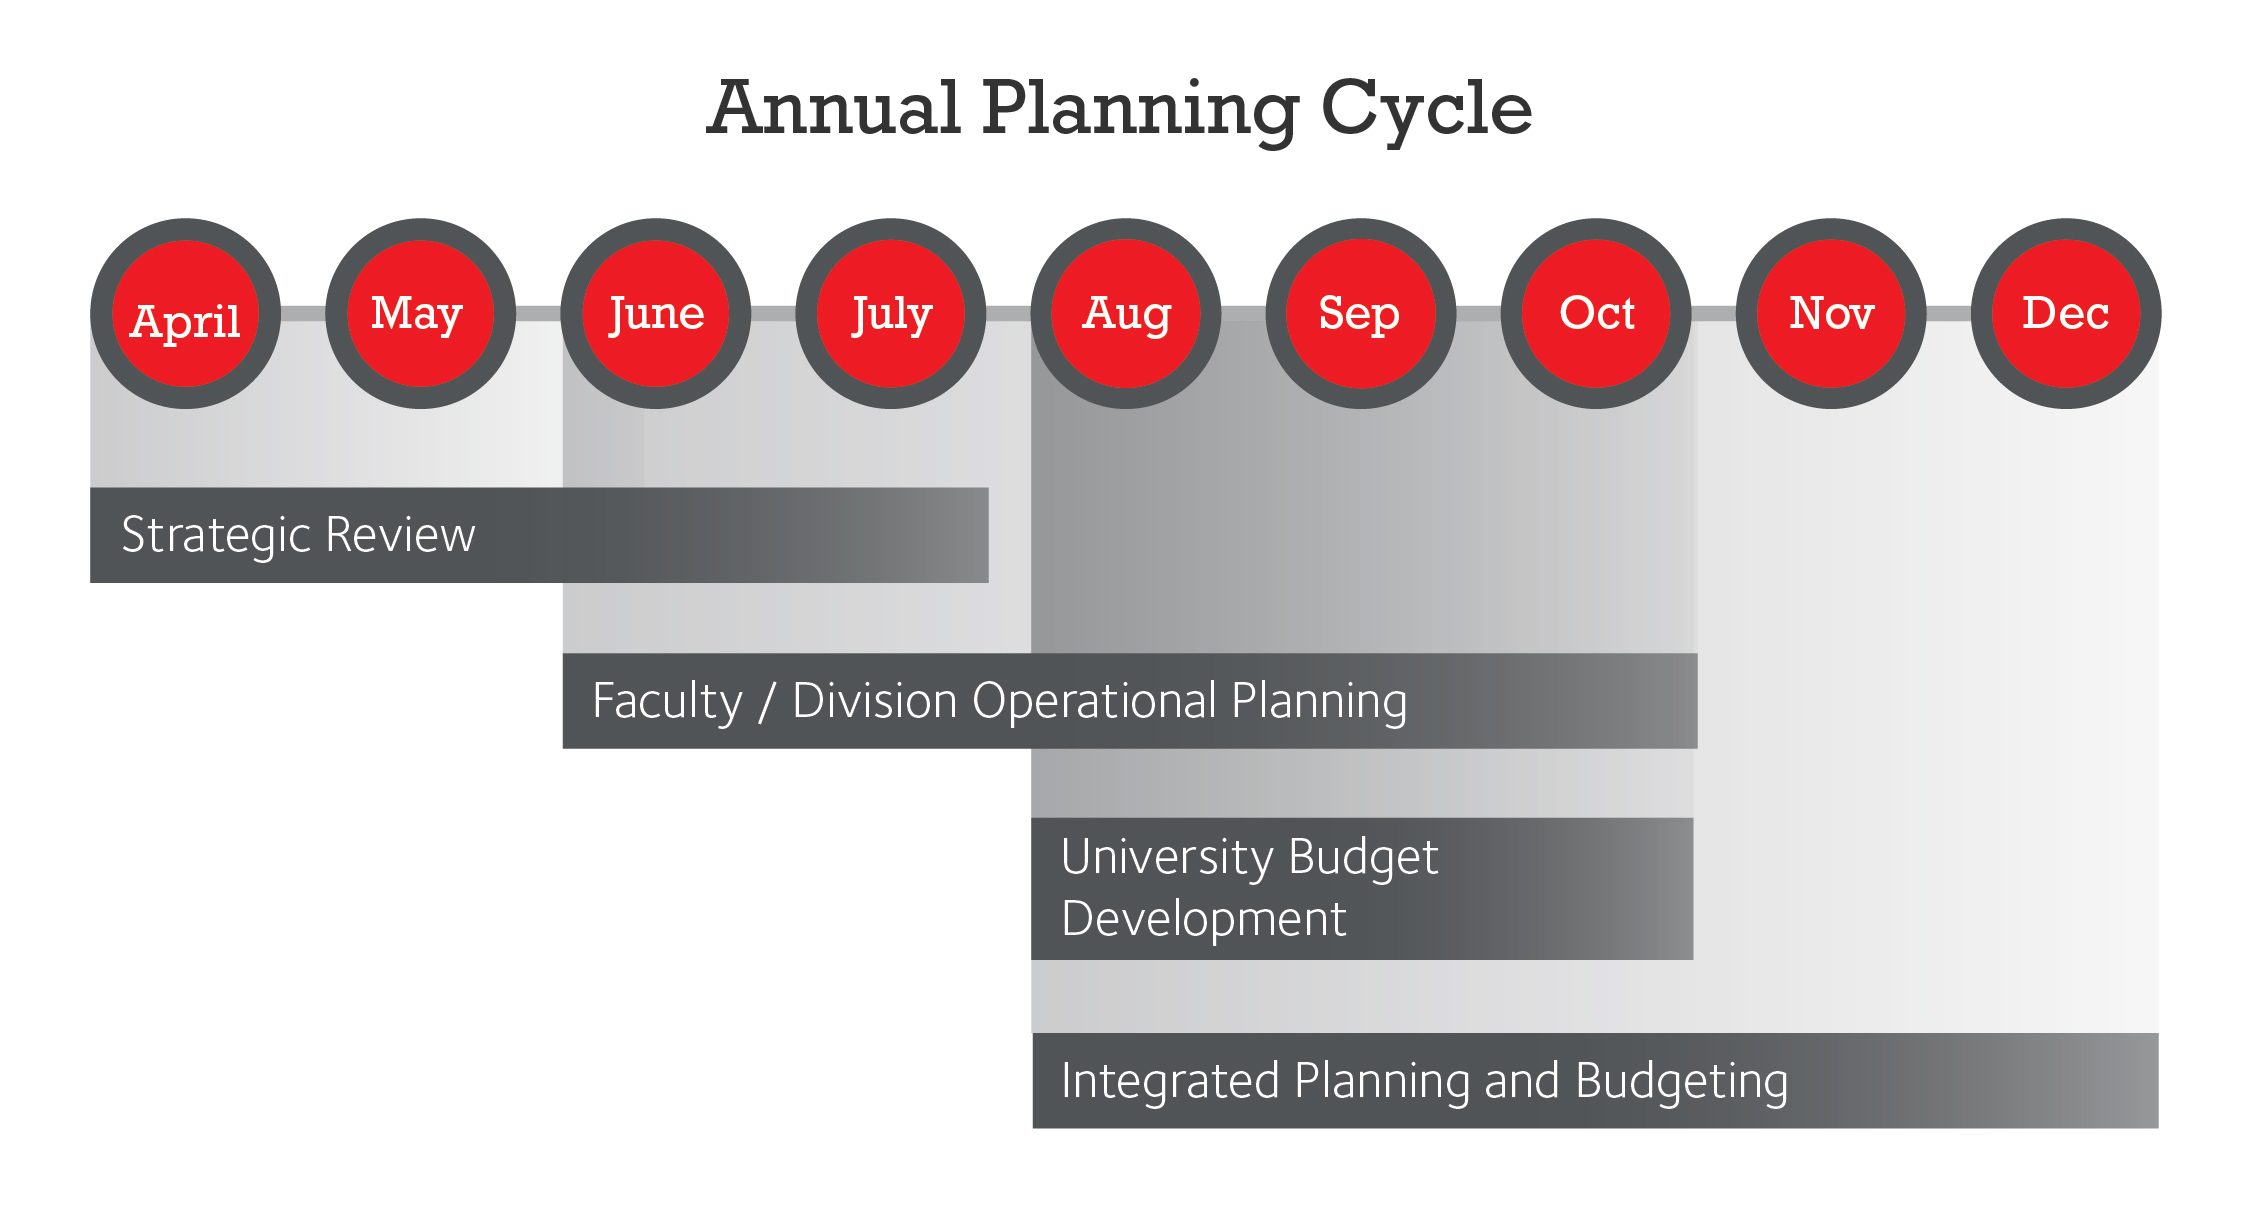 Annual planning cycle